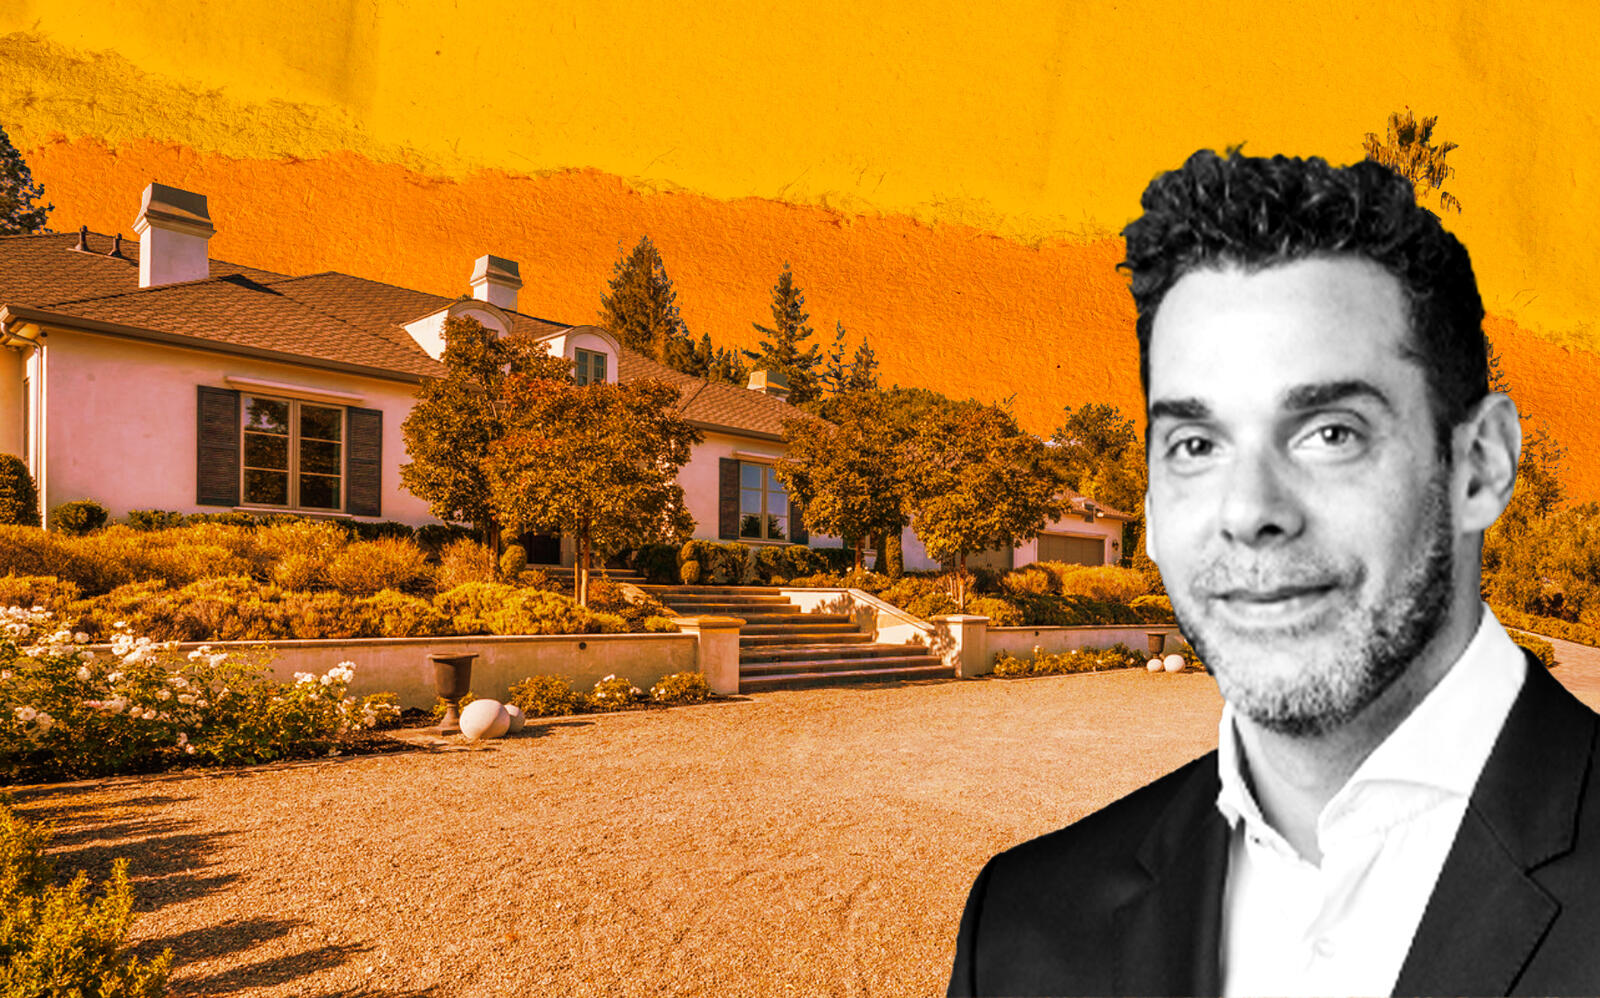 SentinelOne CEO Tomer Weingarten and the Los Altos home (SentinelOne, Sotheby's)